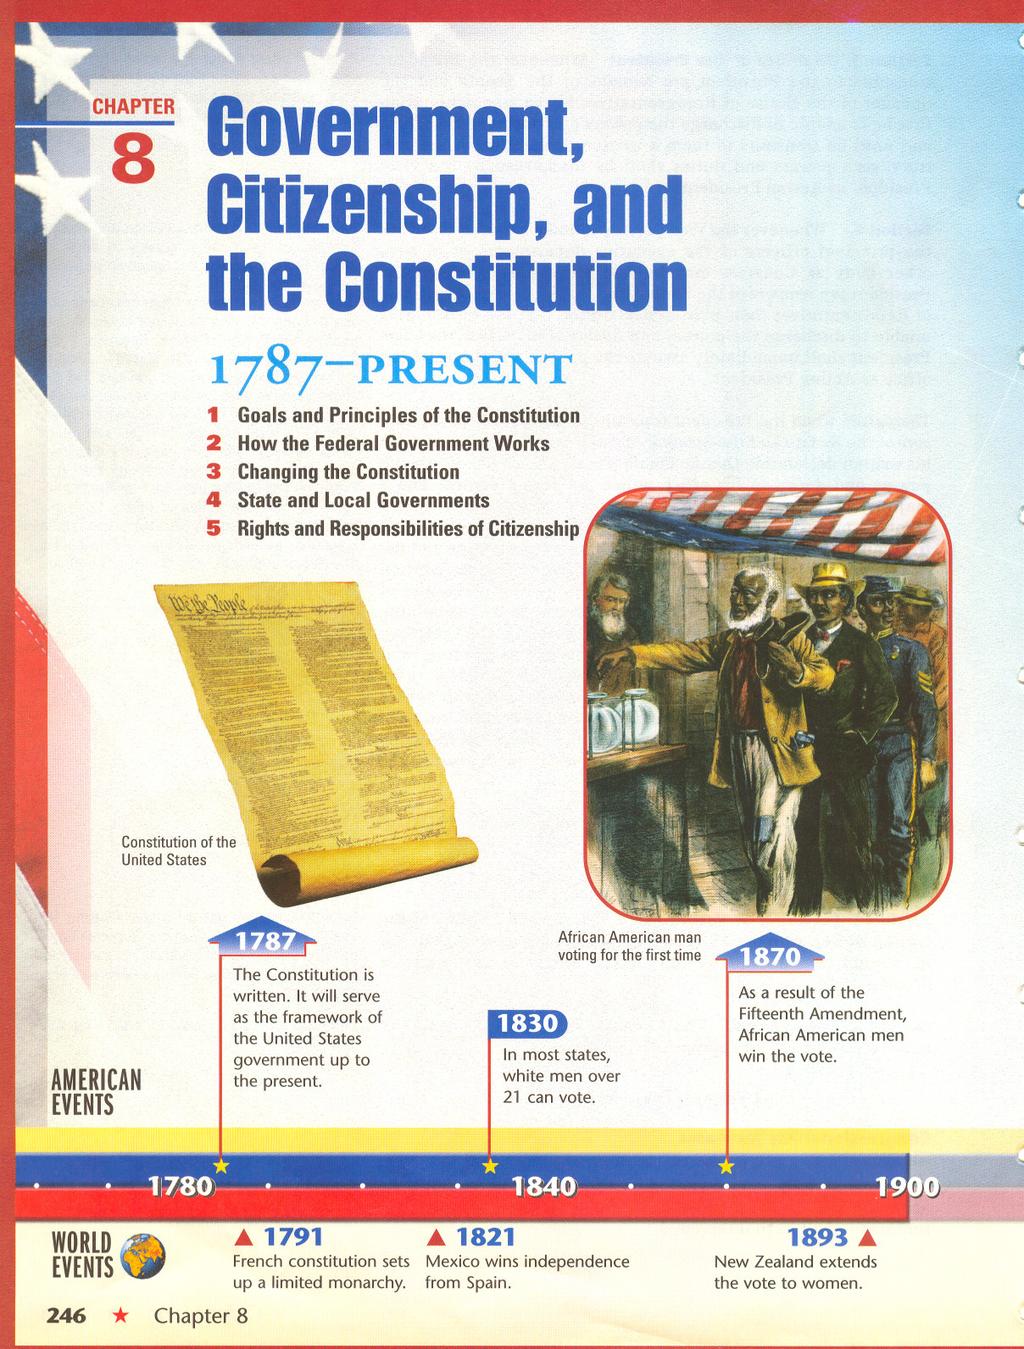 .. 8 Government, Citizenship, and the Constitution 1787-PRESENT 1 Goals and Principles of the Constitution 2 How the Federal Government Works 3 Changing the Constitution 4 State and Local Governments